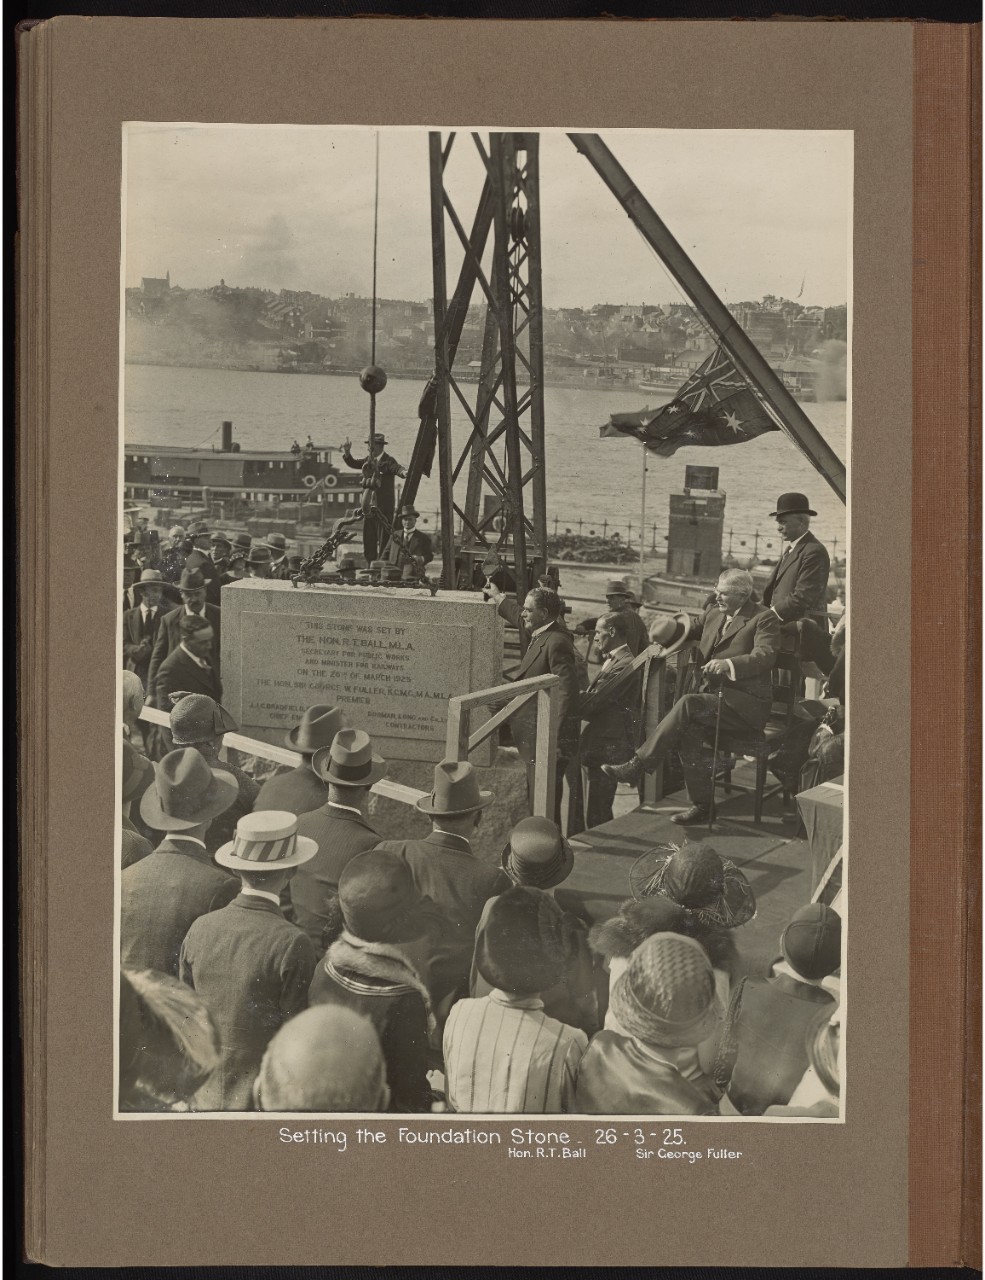 A page from an old photo album, featuring a black-and-white photograph of people gathered around a bridge's foundation stone.